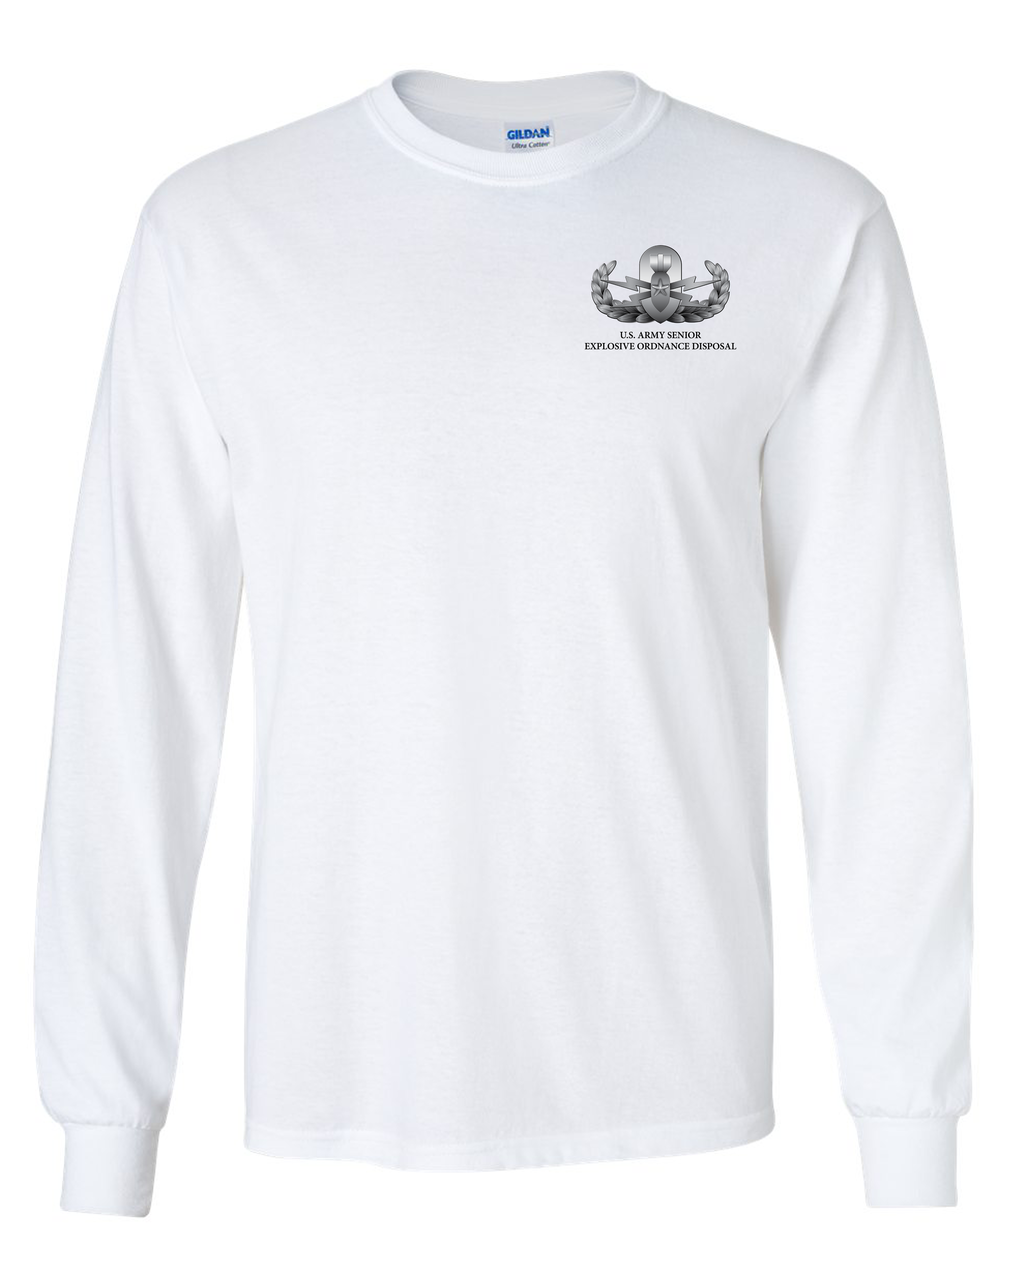 US Army EOD Long-Sleeve Cotton T-Shirt